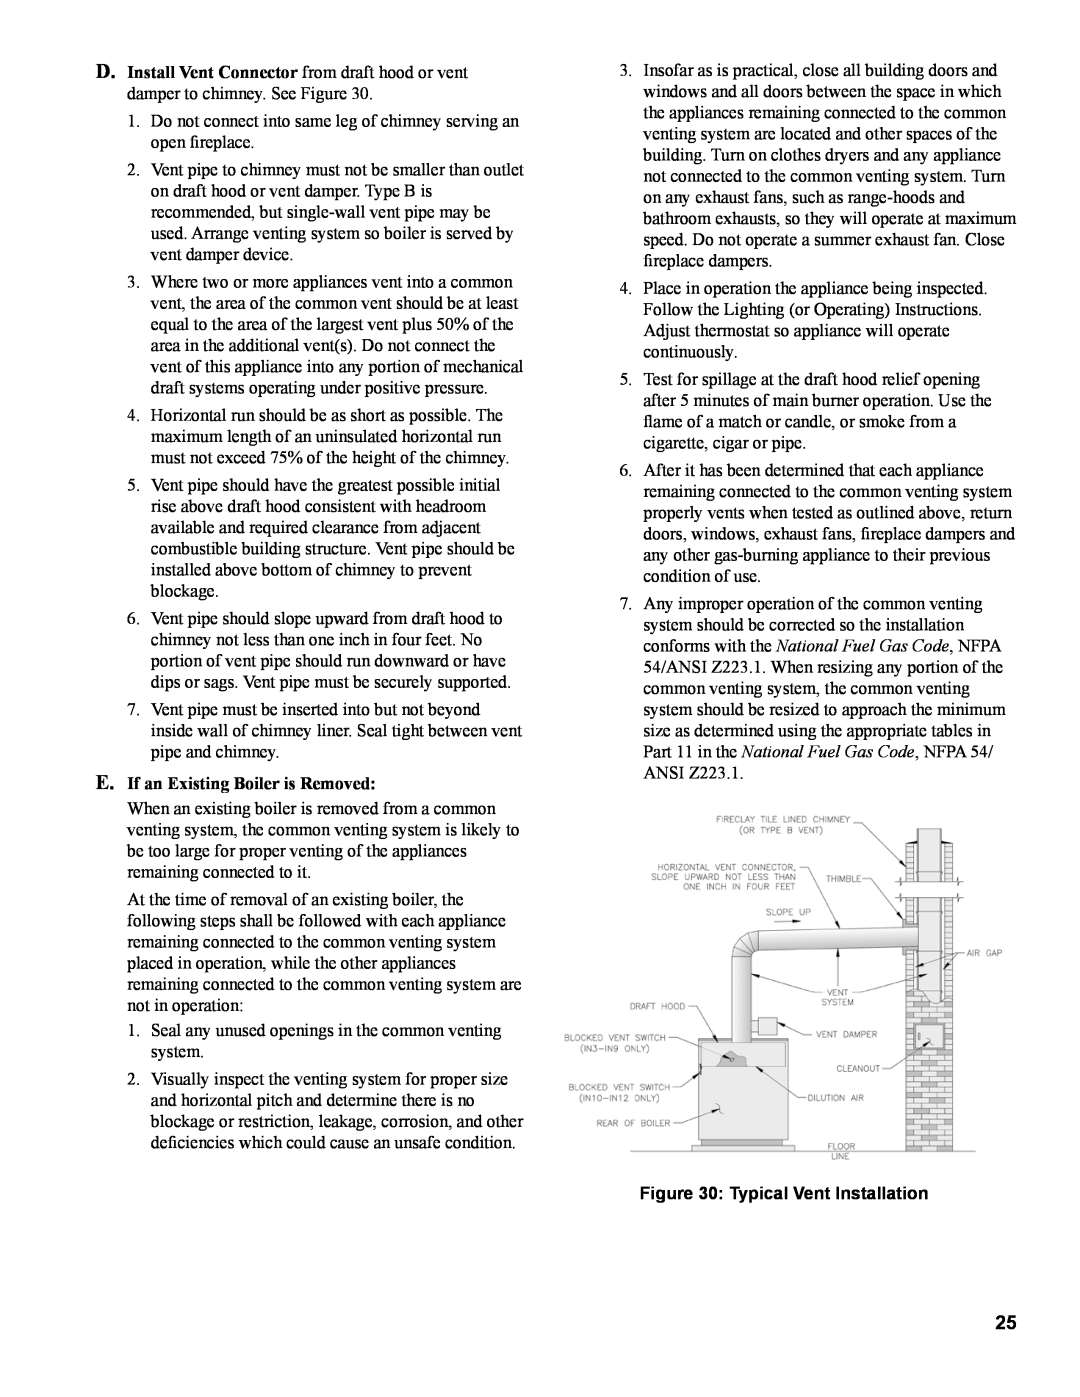 Burnham IN10 manual E. If an Existing Boiler is Removed, Typical Vent Installation 